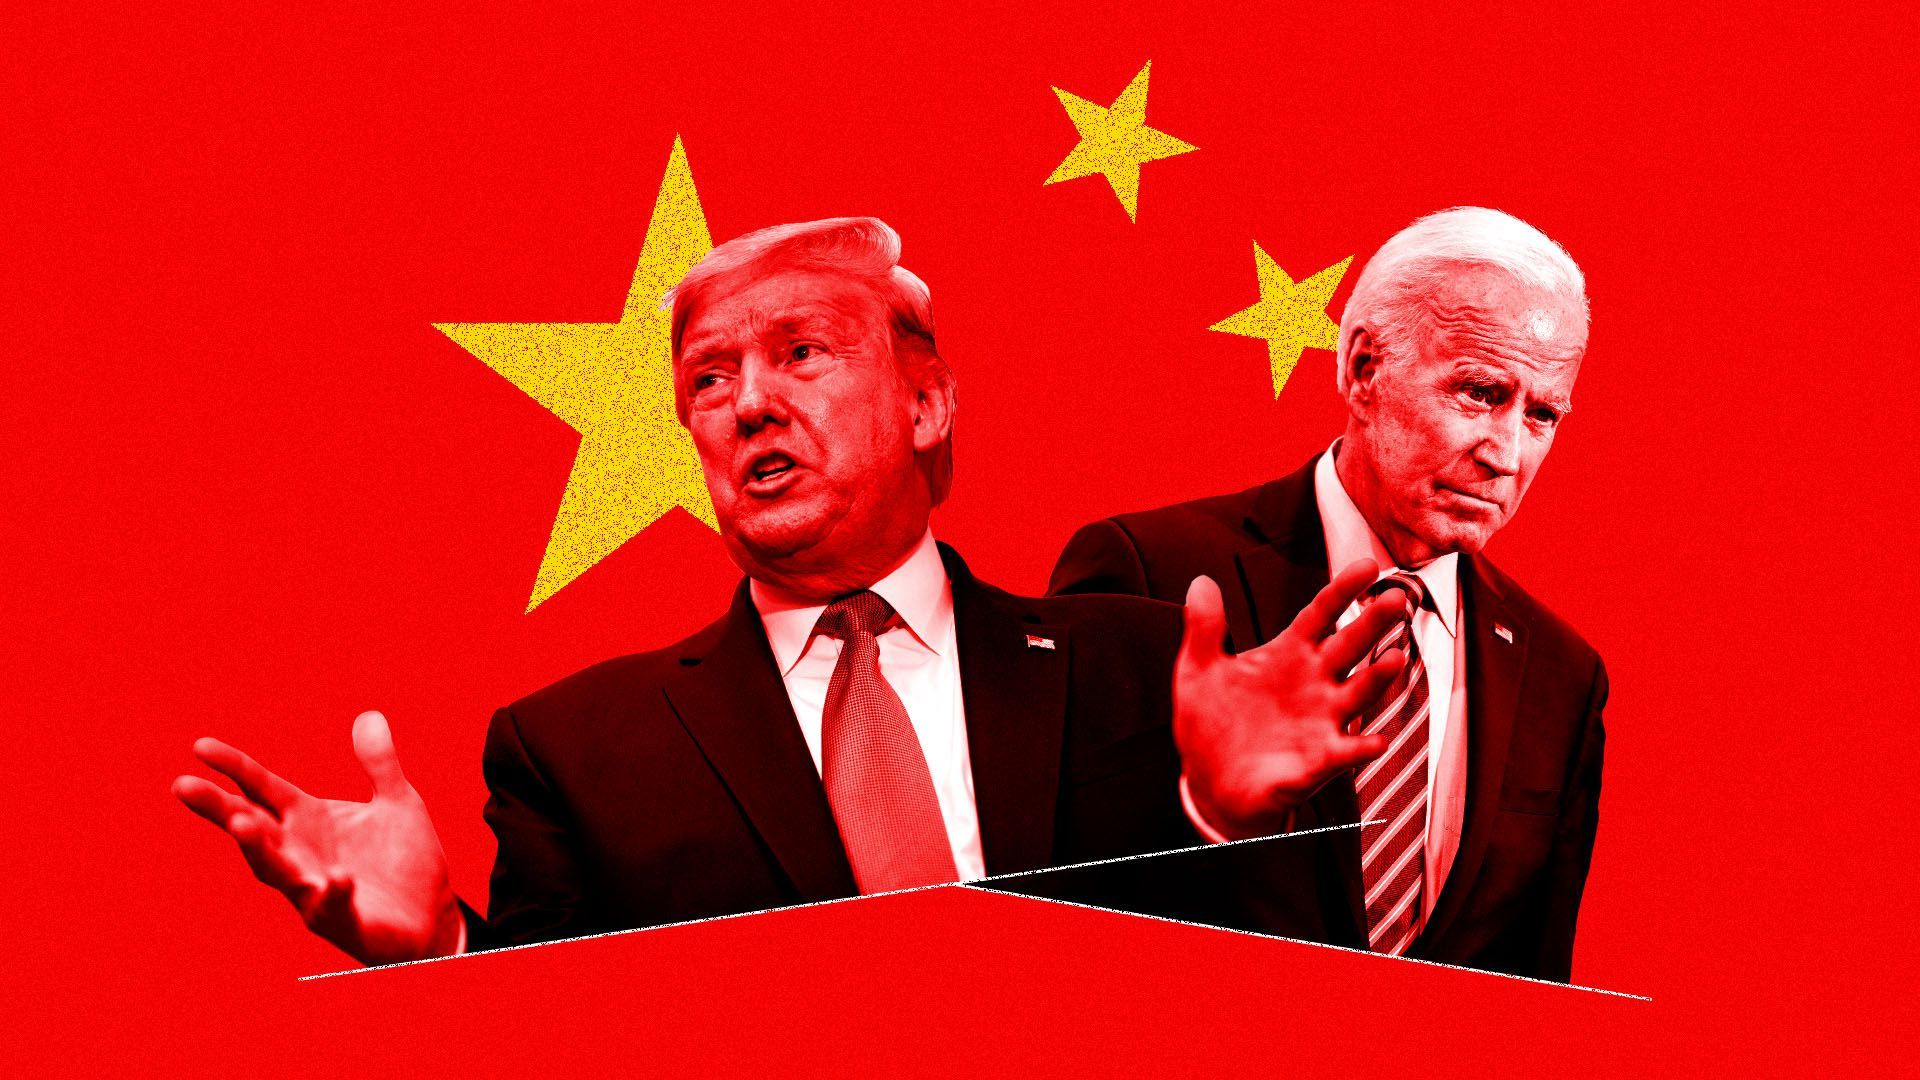 The Trump campaign is planning to hammer Biden on his posture toward China